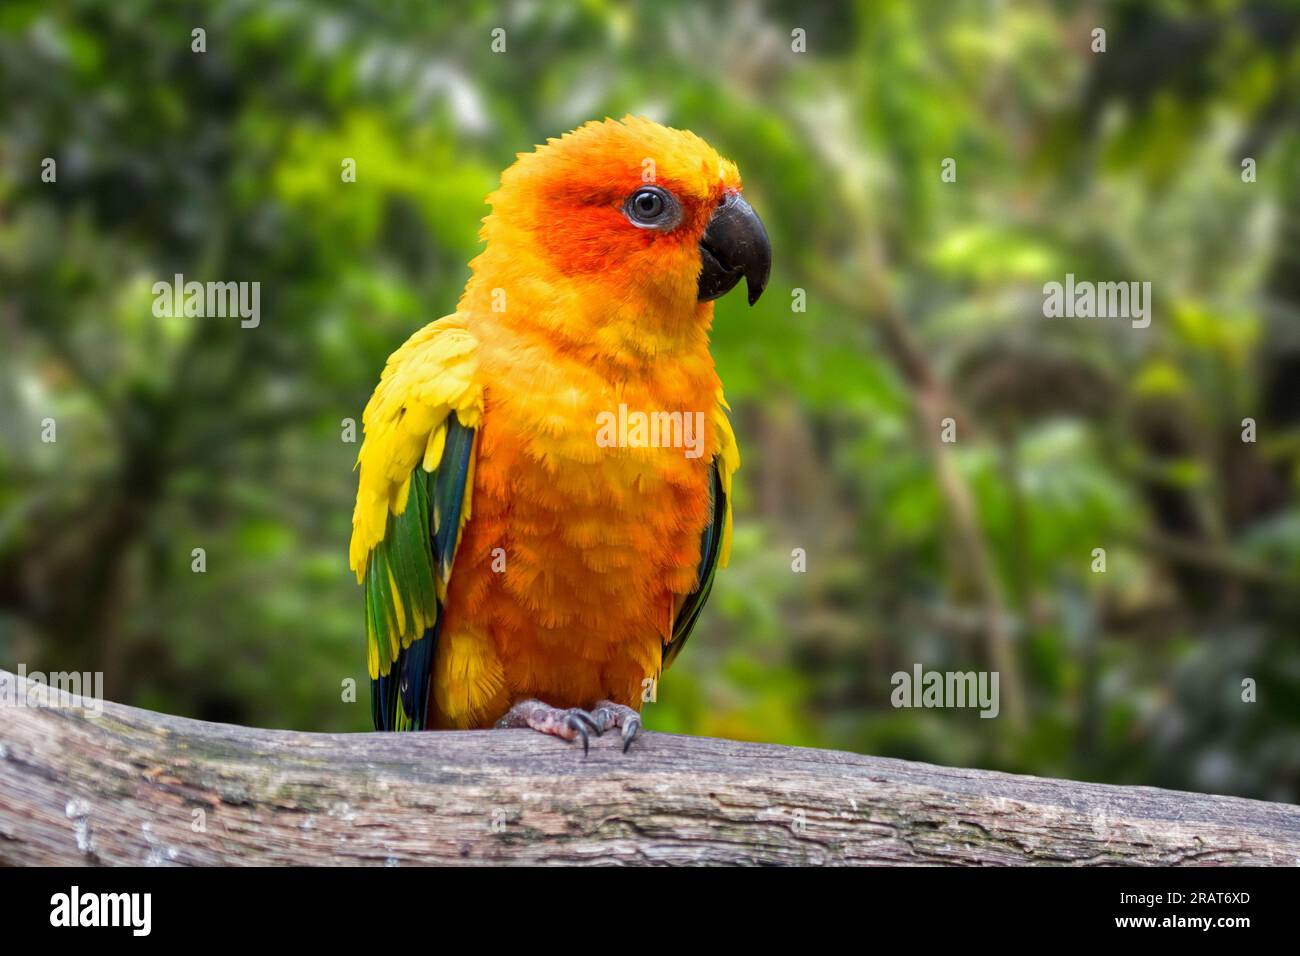 Sun parakeet / sun conure (Aratinga solstitialis) perched in tree, medium-sized, vibrantly colored parrot native to northeastern South America Stock Photo